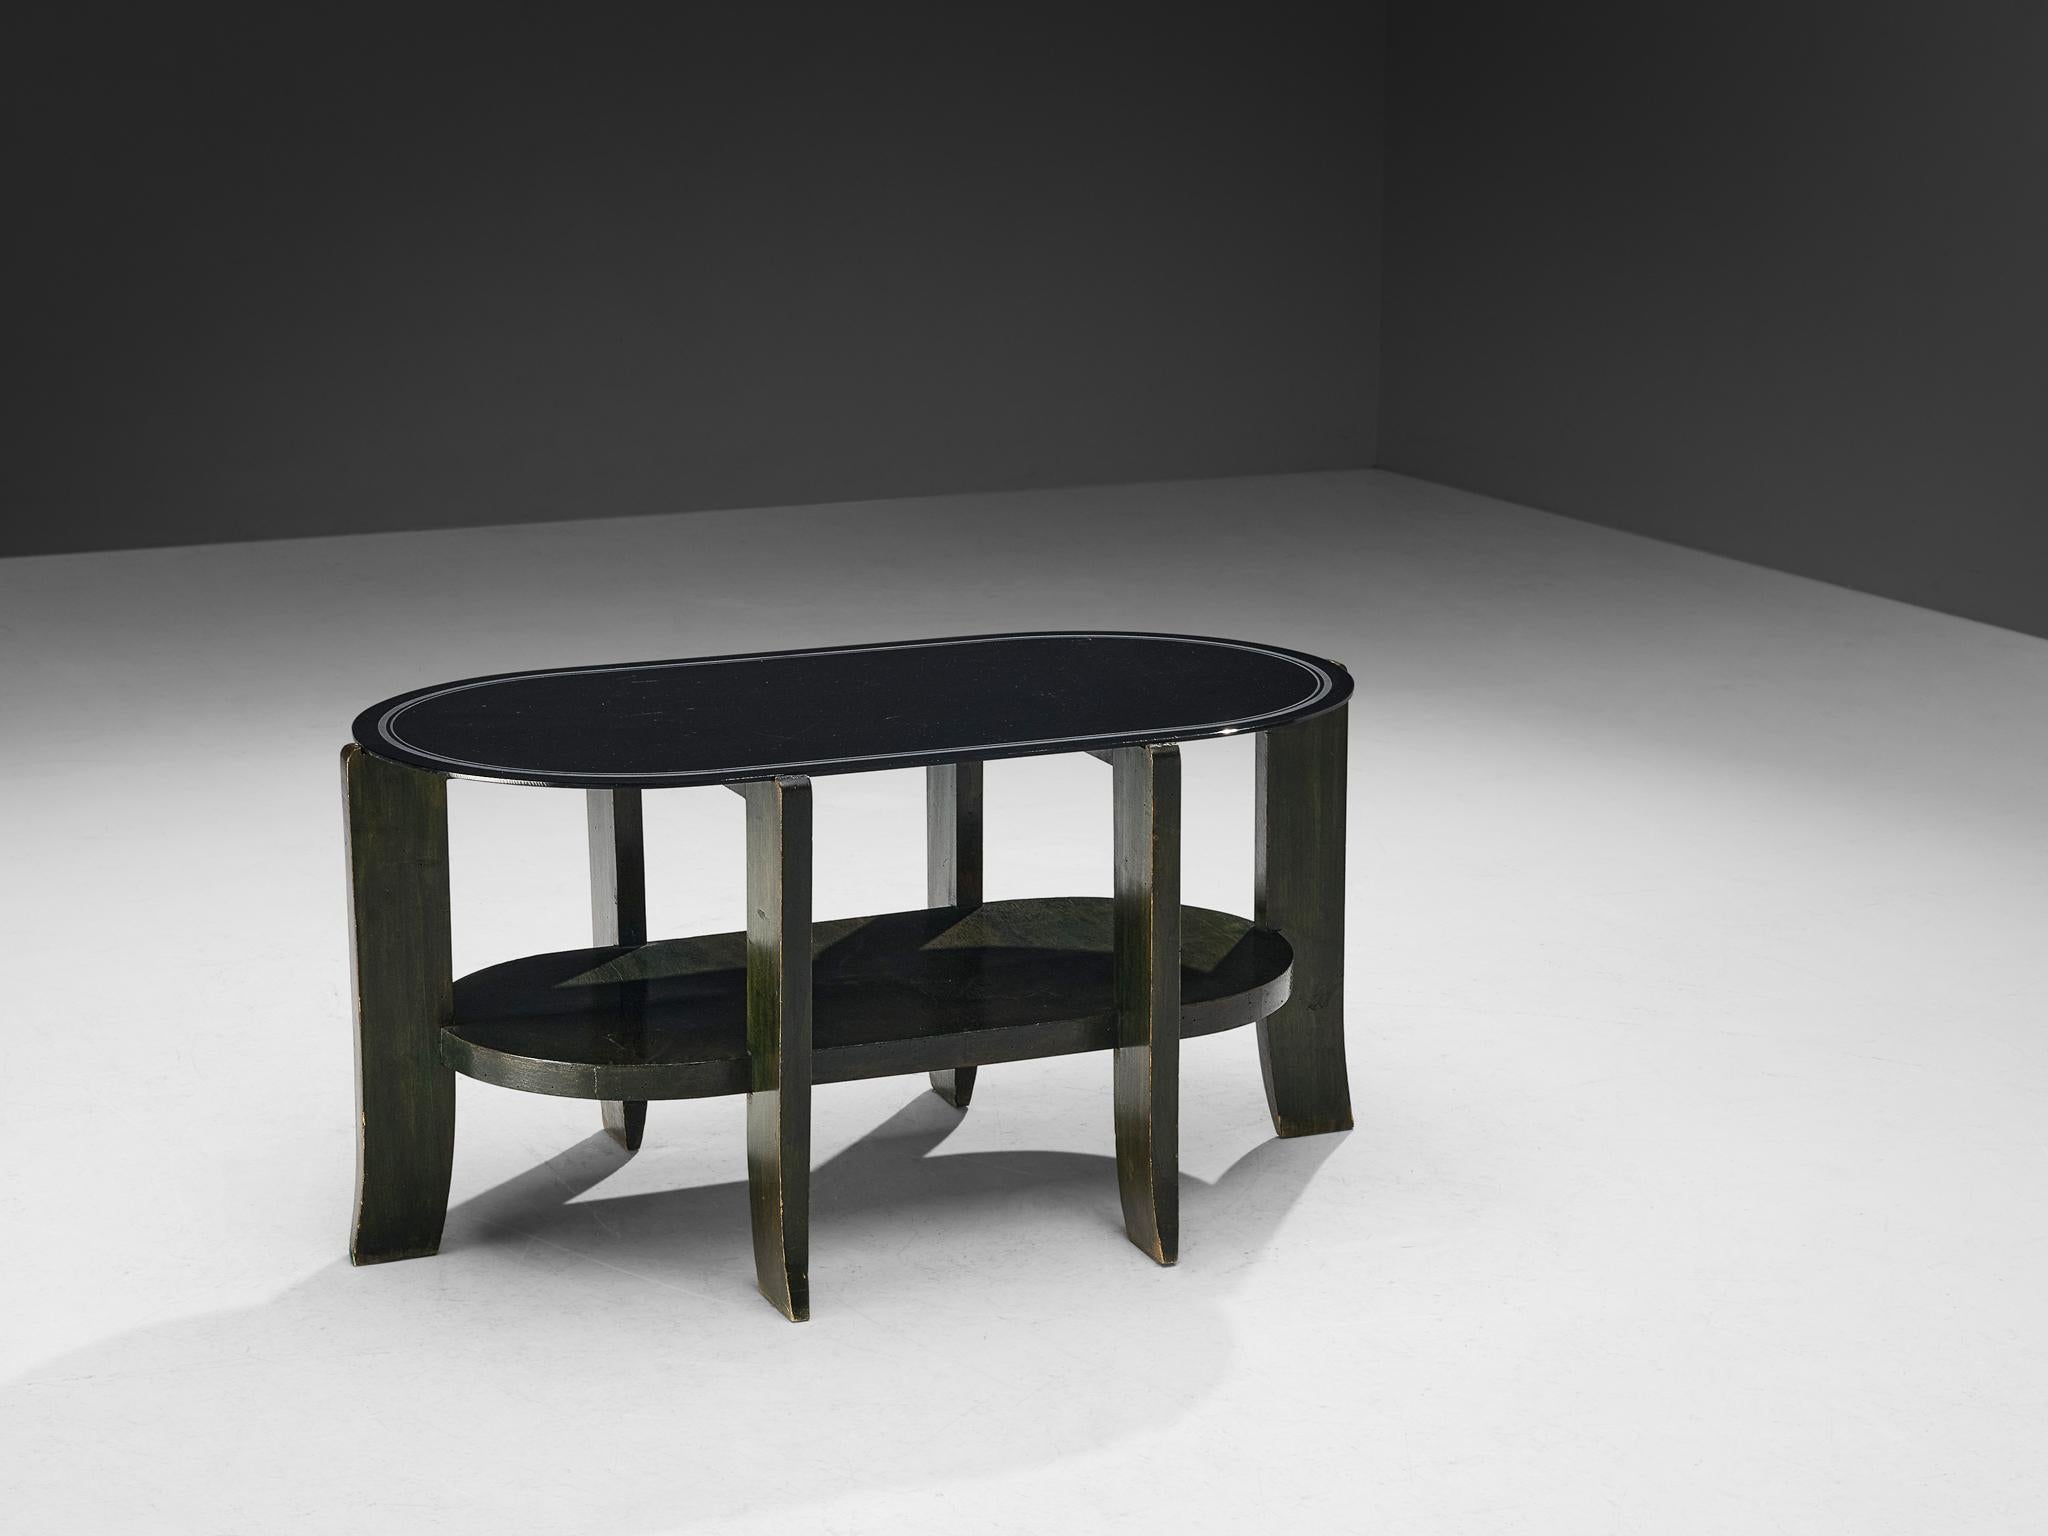 Coffee table, stained wood, glass, Italy, 1940s

This art deco coffee table embodies a stable and strong structure. The double layered feature holds a functional property, yet gives the unit extra dimensionality.  The table is supported by evenly